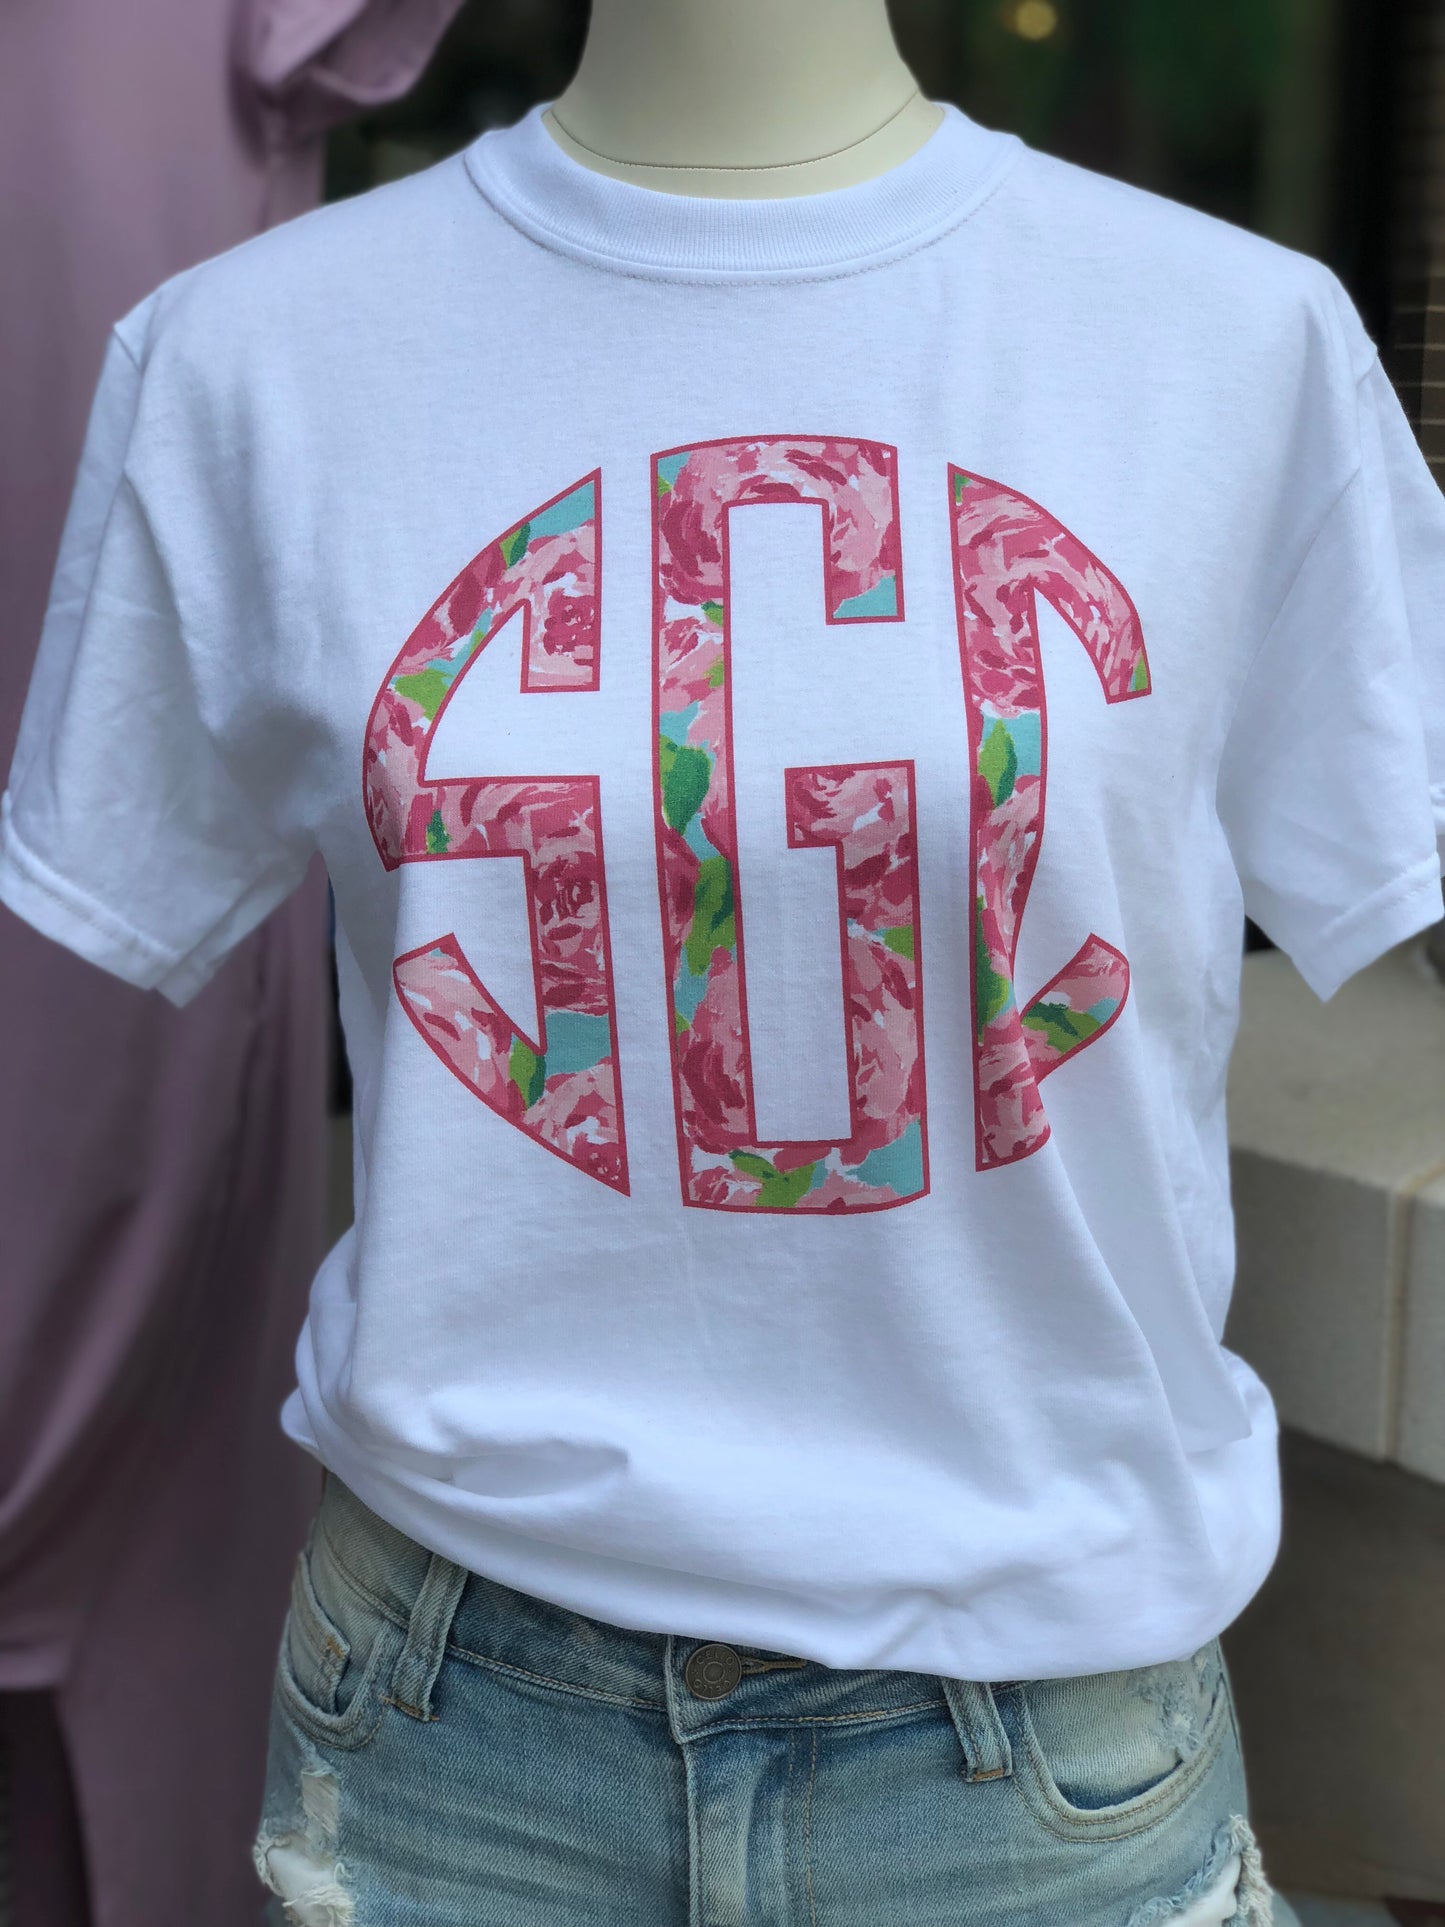 PINK FLOWER (LILLY PULITZER INSPIRED) CIRCLE MONOGRAM PRINTED SHIRT - Southern Grace Creations